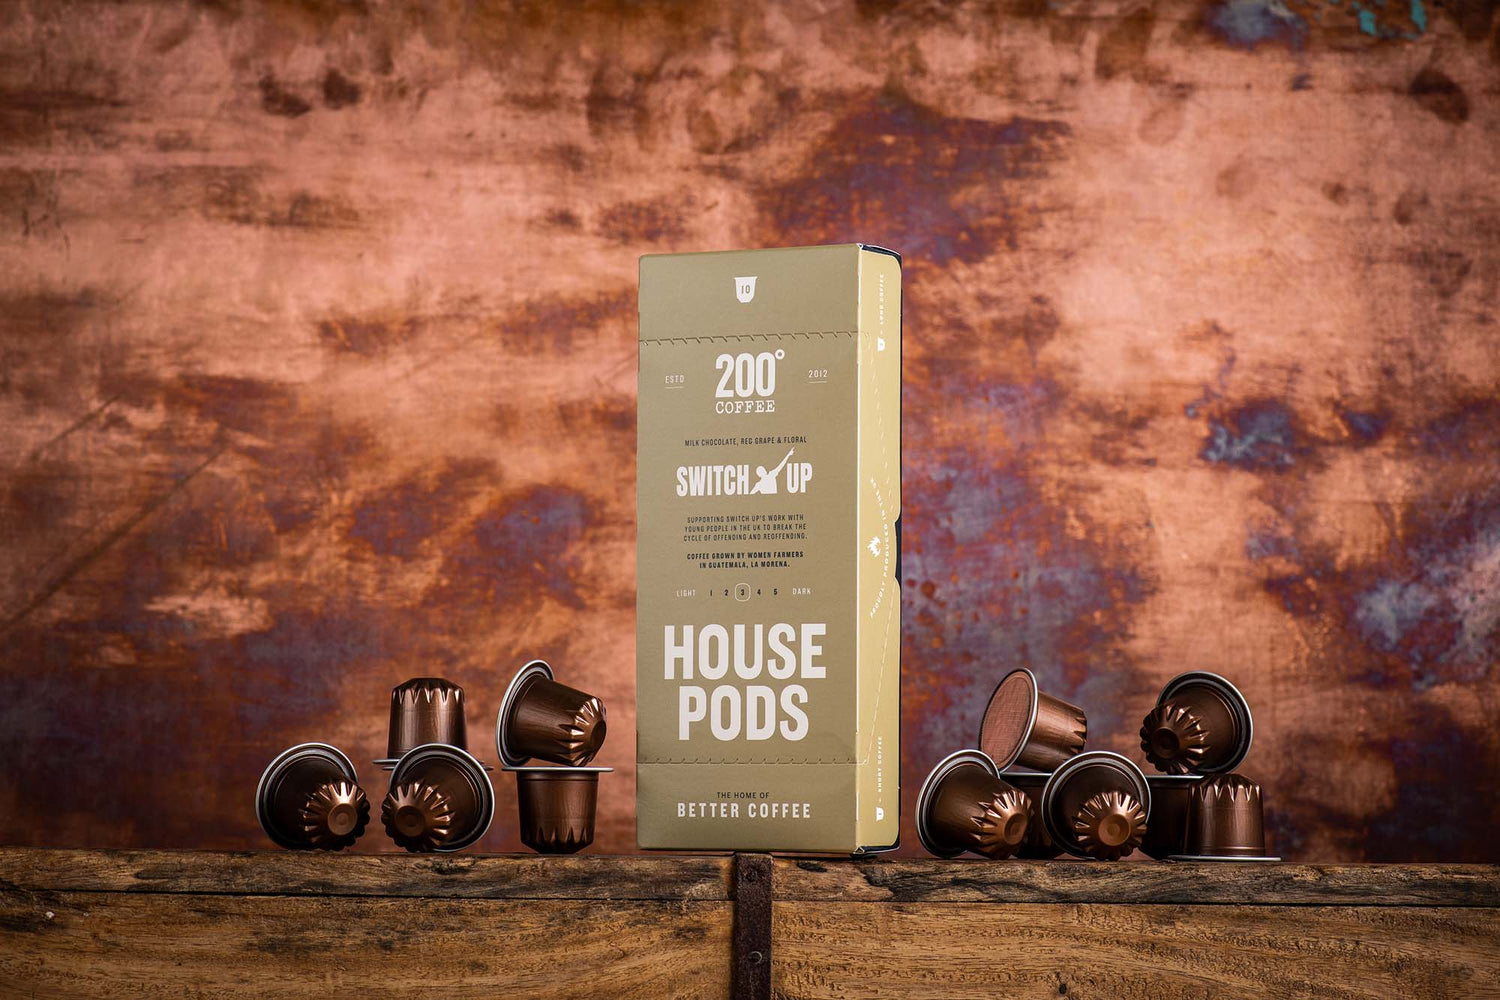 Switch Up Charity Coffee Pods from 200 Degrees coffee